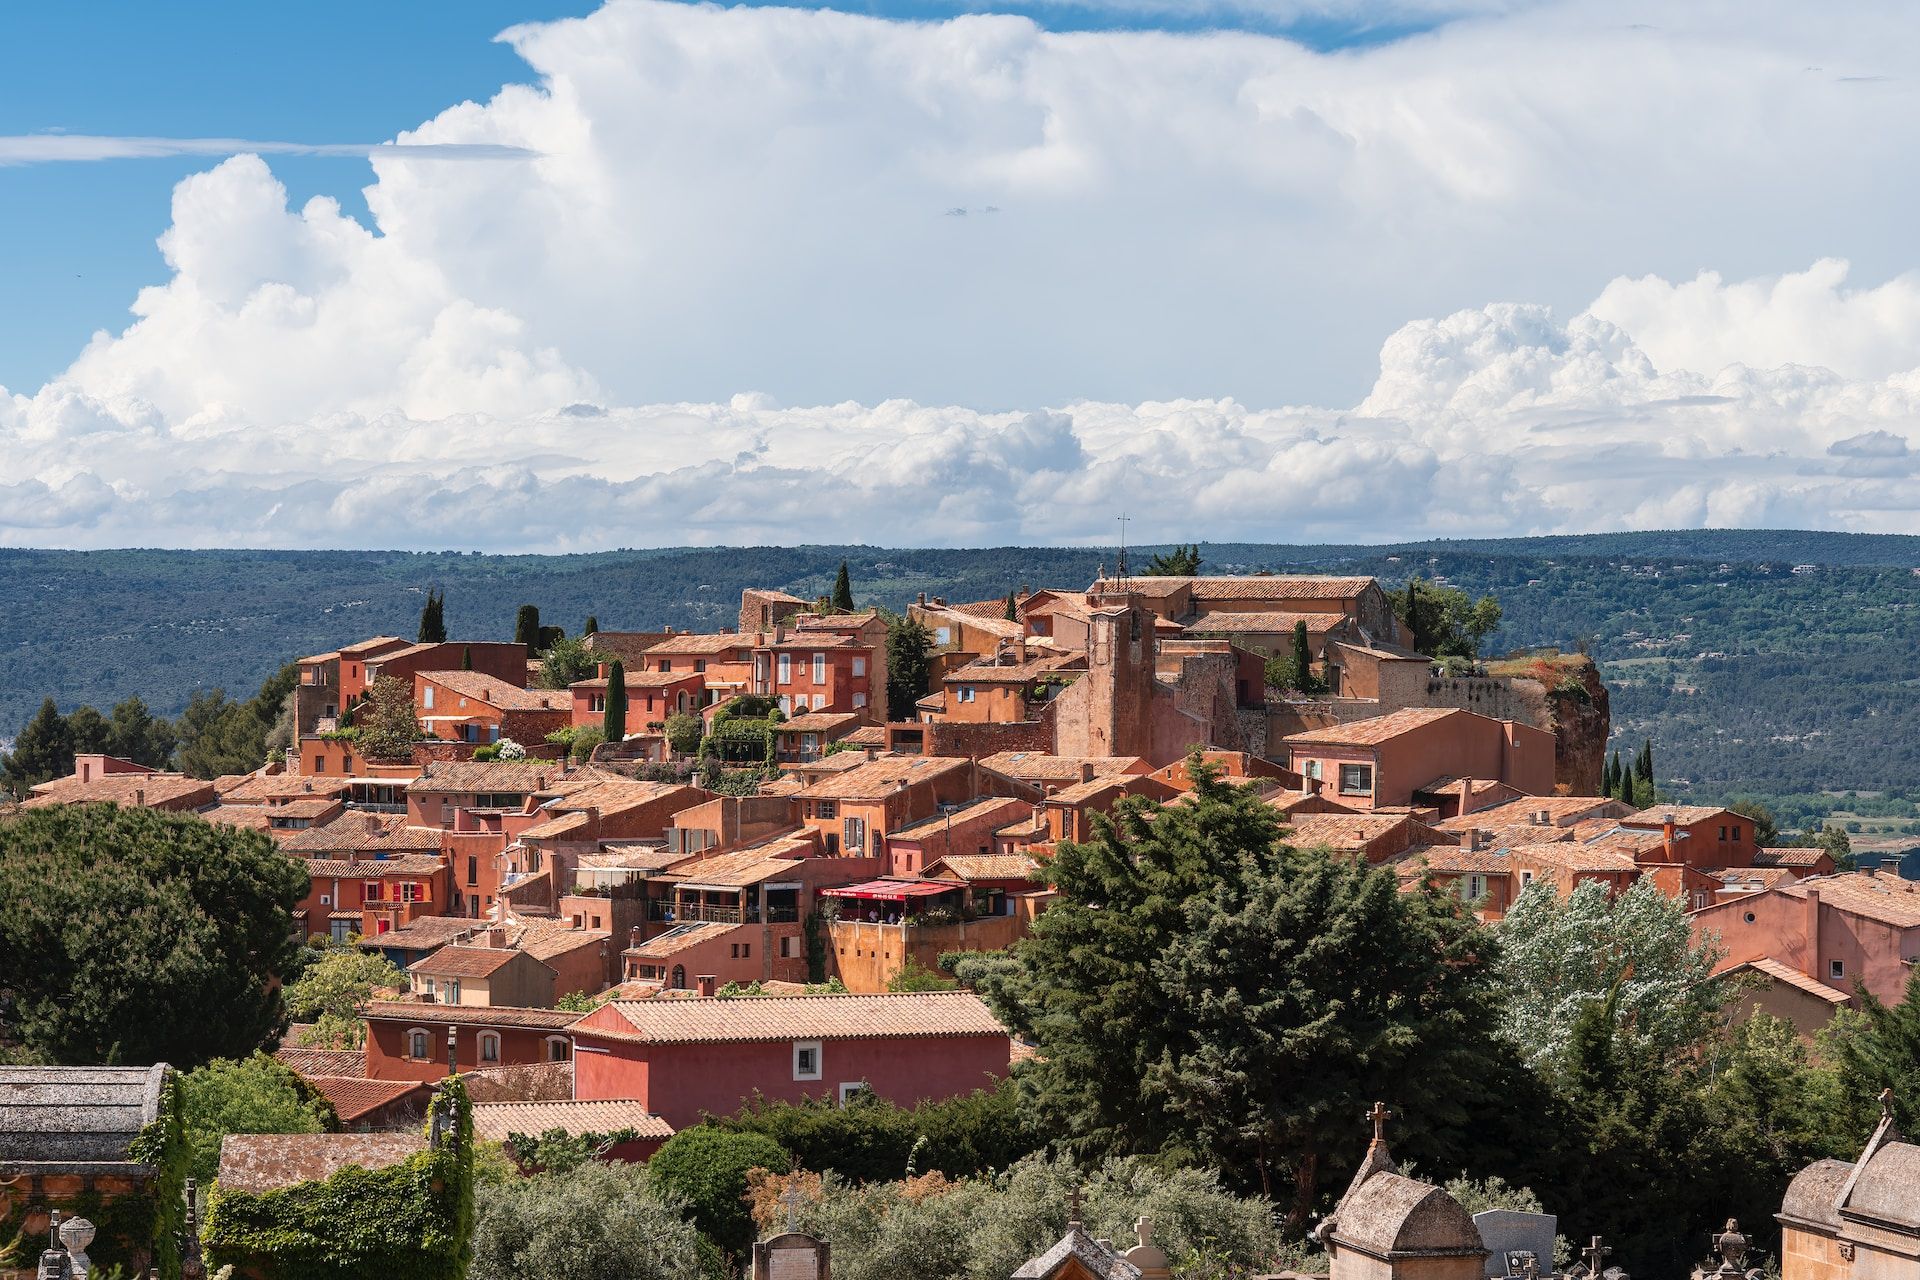 Roussillon, an unfrequented destination in France with stunning ochre-colored cliffs and buildings